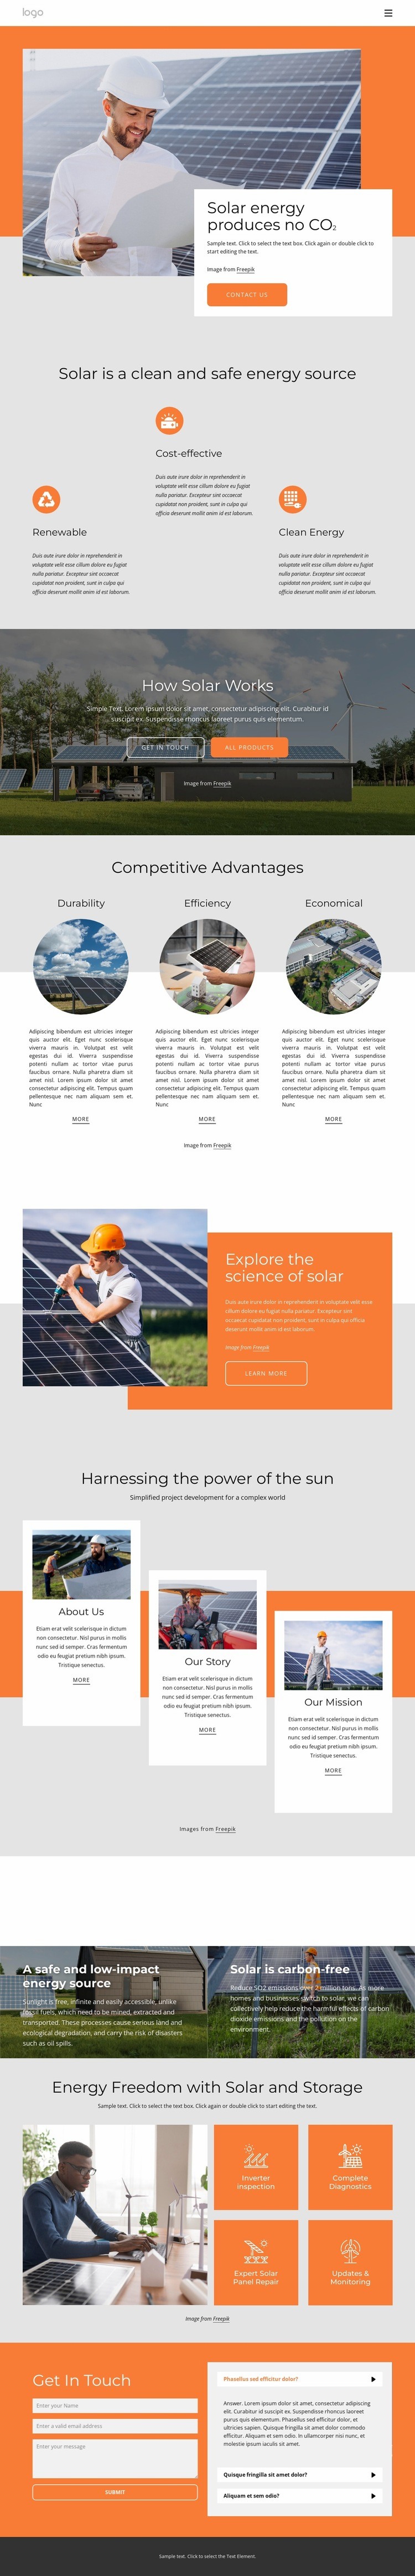 Power your home with clean solar energy Html Code Example